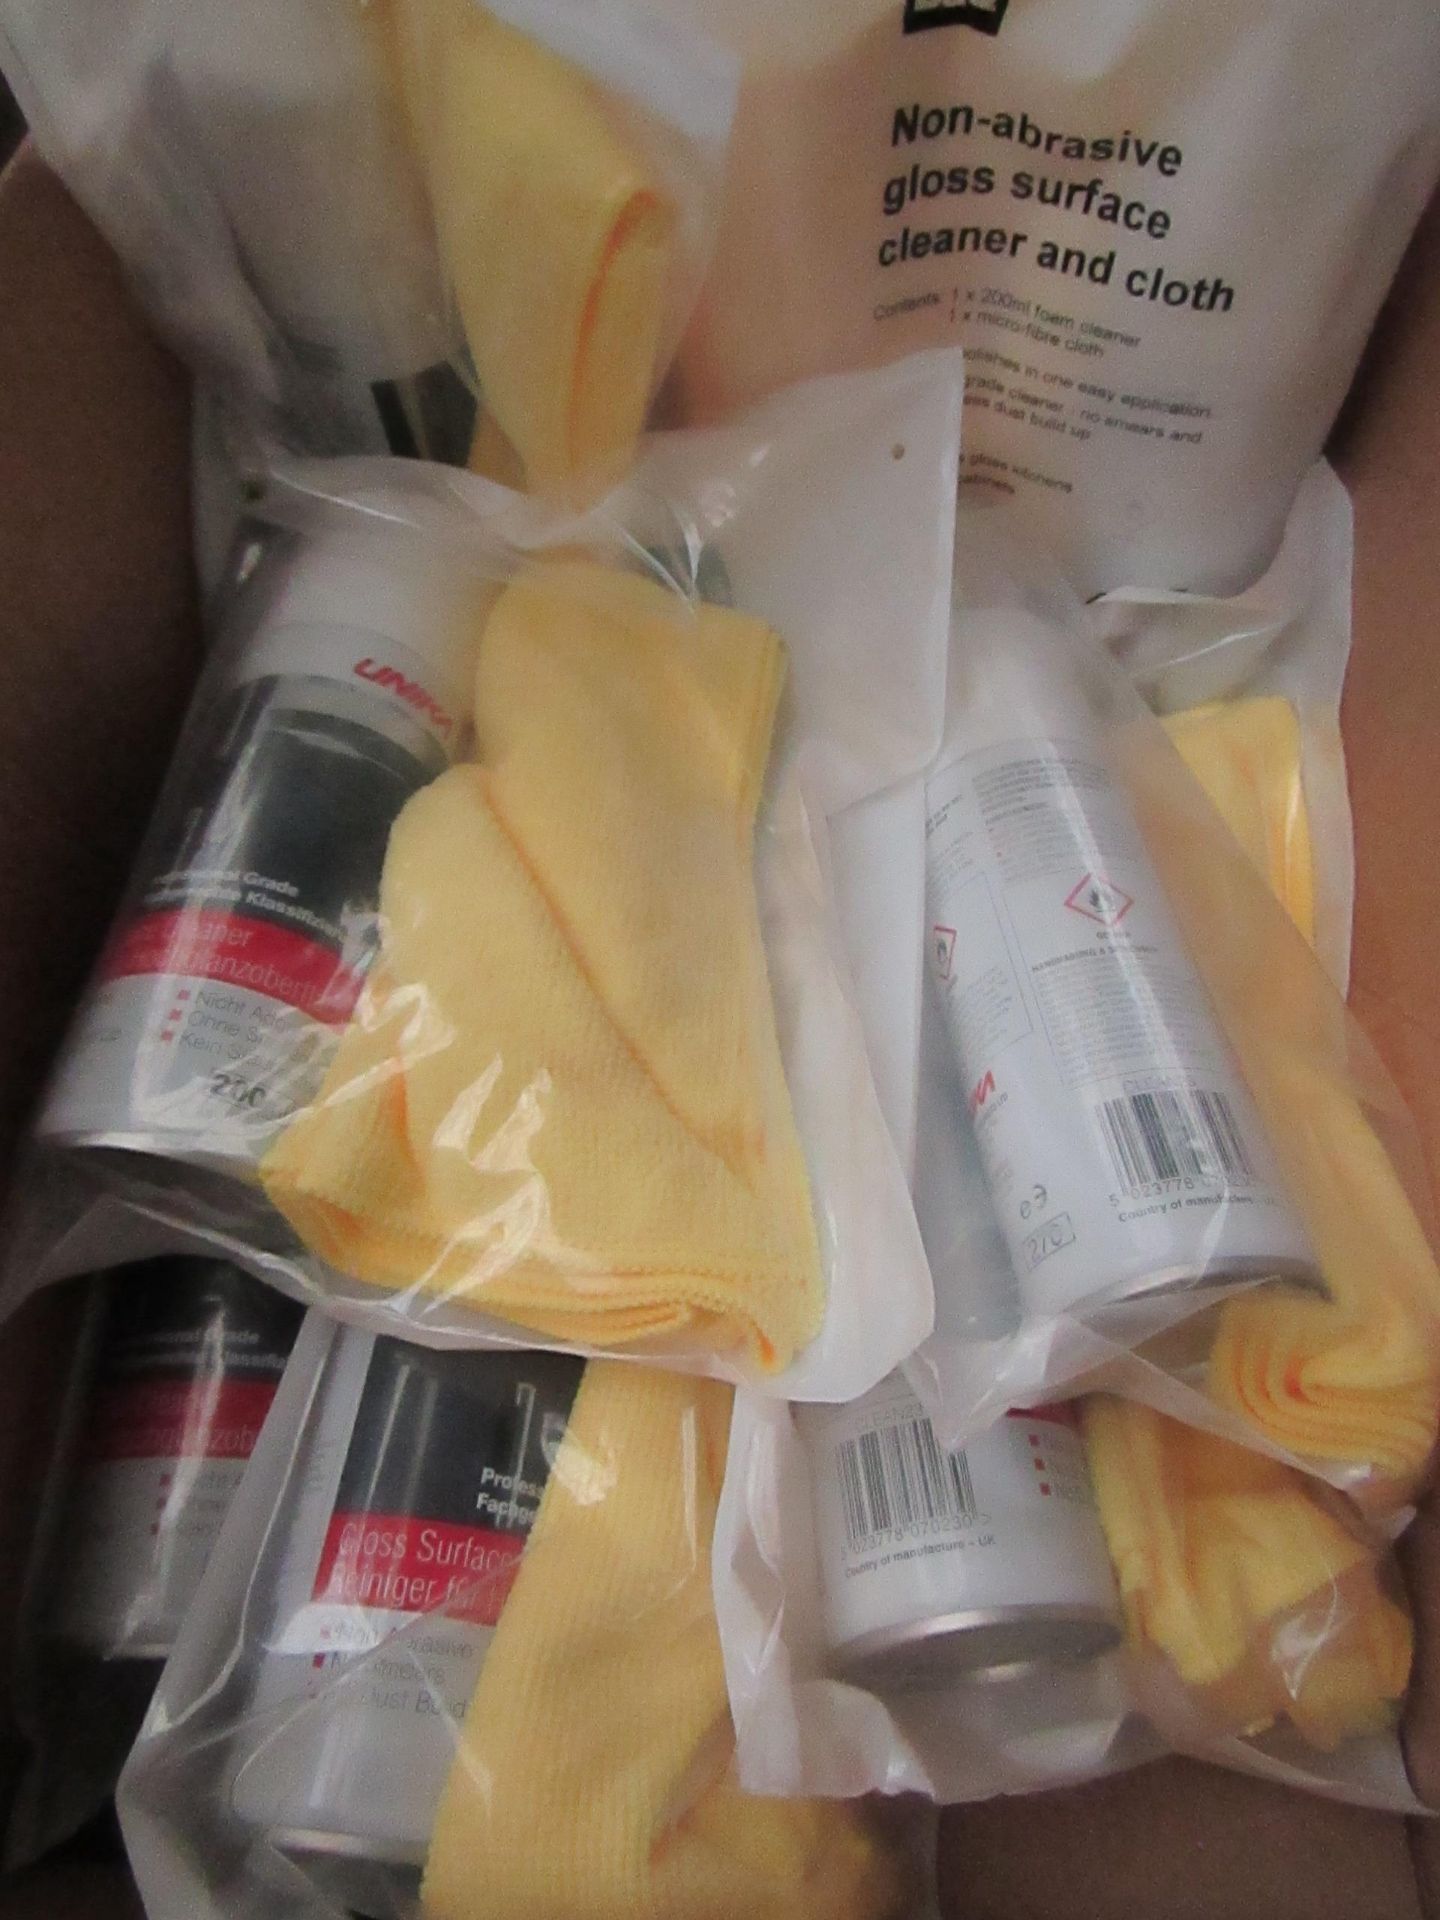 5x B&Q - Non Abrasive Gloss Surface Cleaner & Cloth Set - Unused & Packaged.